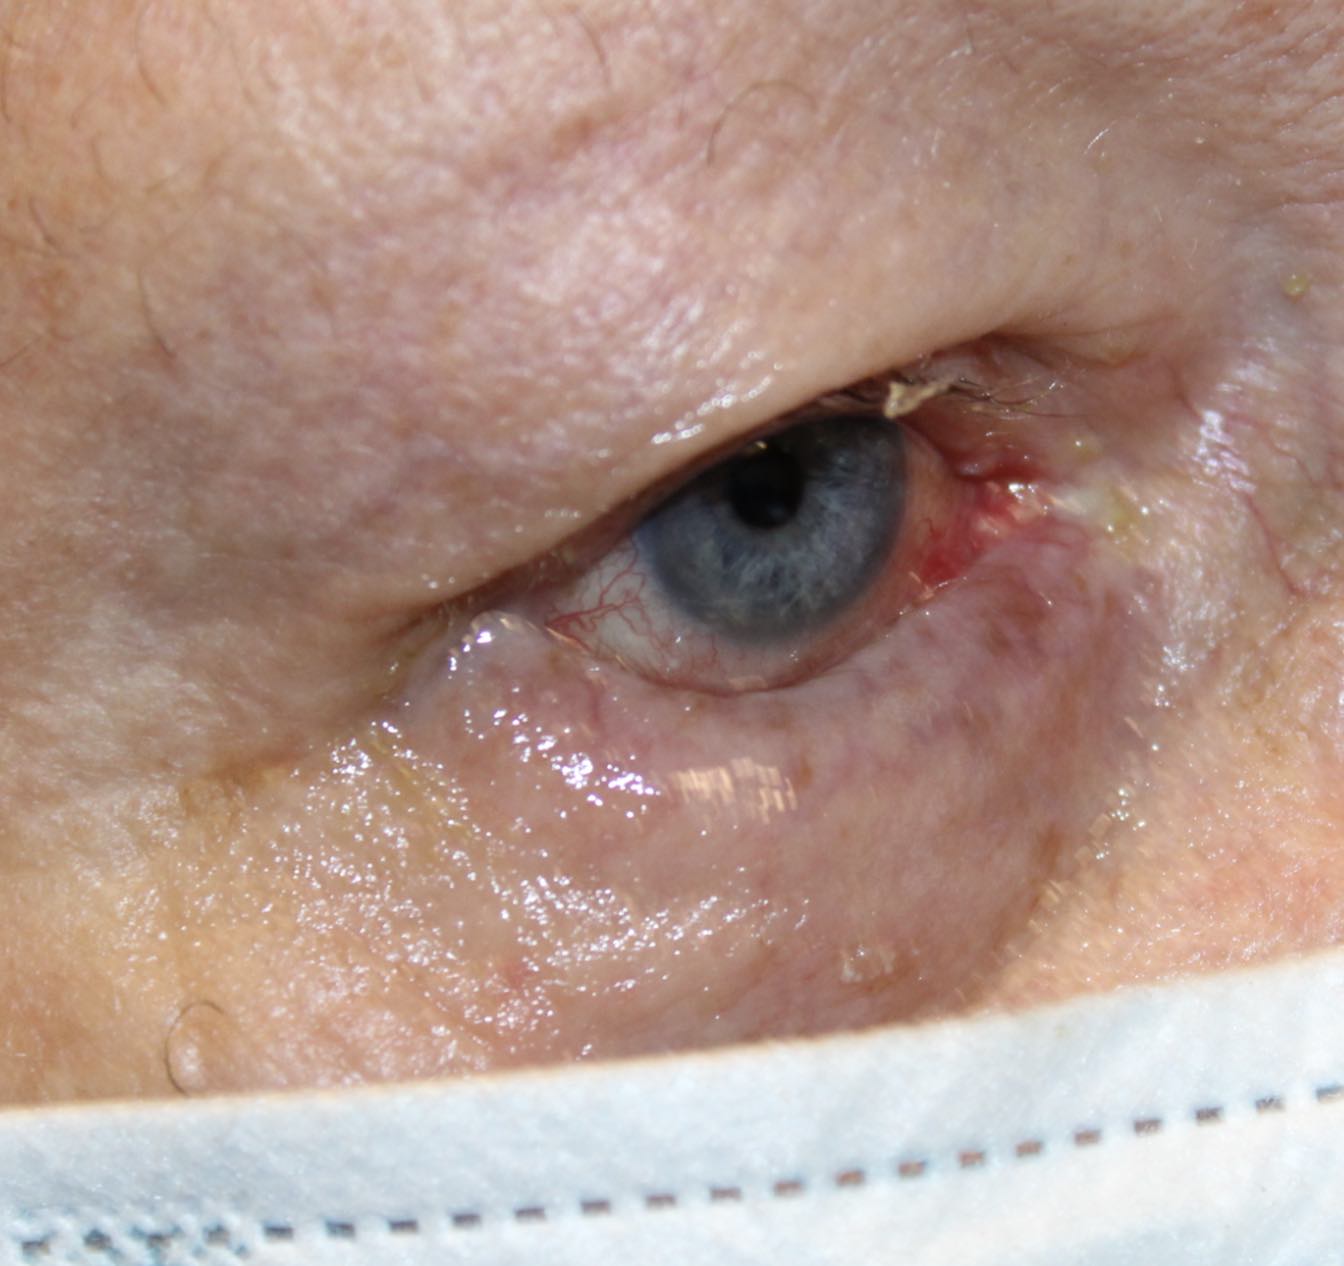 75 year old male after entropion eye repair